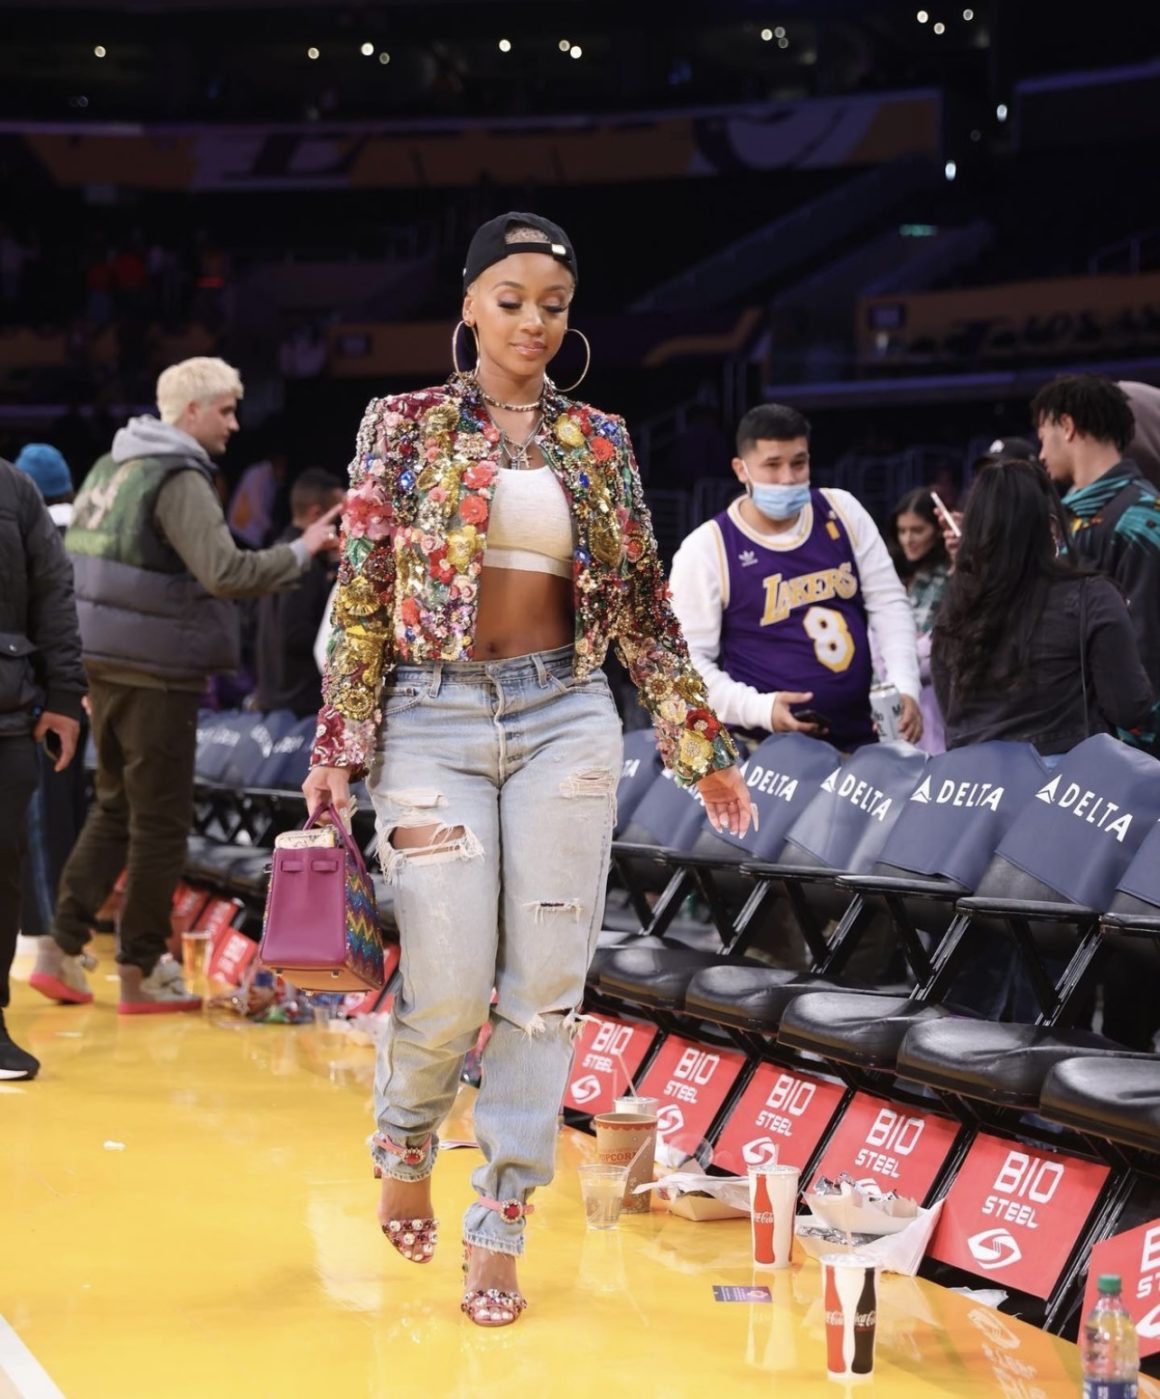 Saweetie Attends Lakers vs. Timberwolves Game in LA Wearing Dolce and Gabbana Embellished Jacket and Pink Heels Paired with White Crop Top Distressed Jeans and Goodie Black Hat5